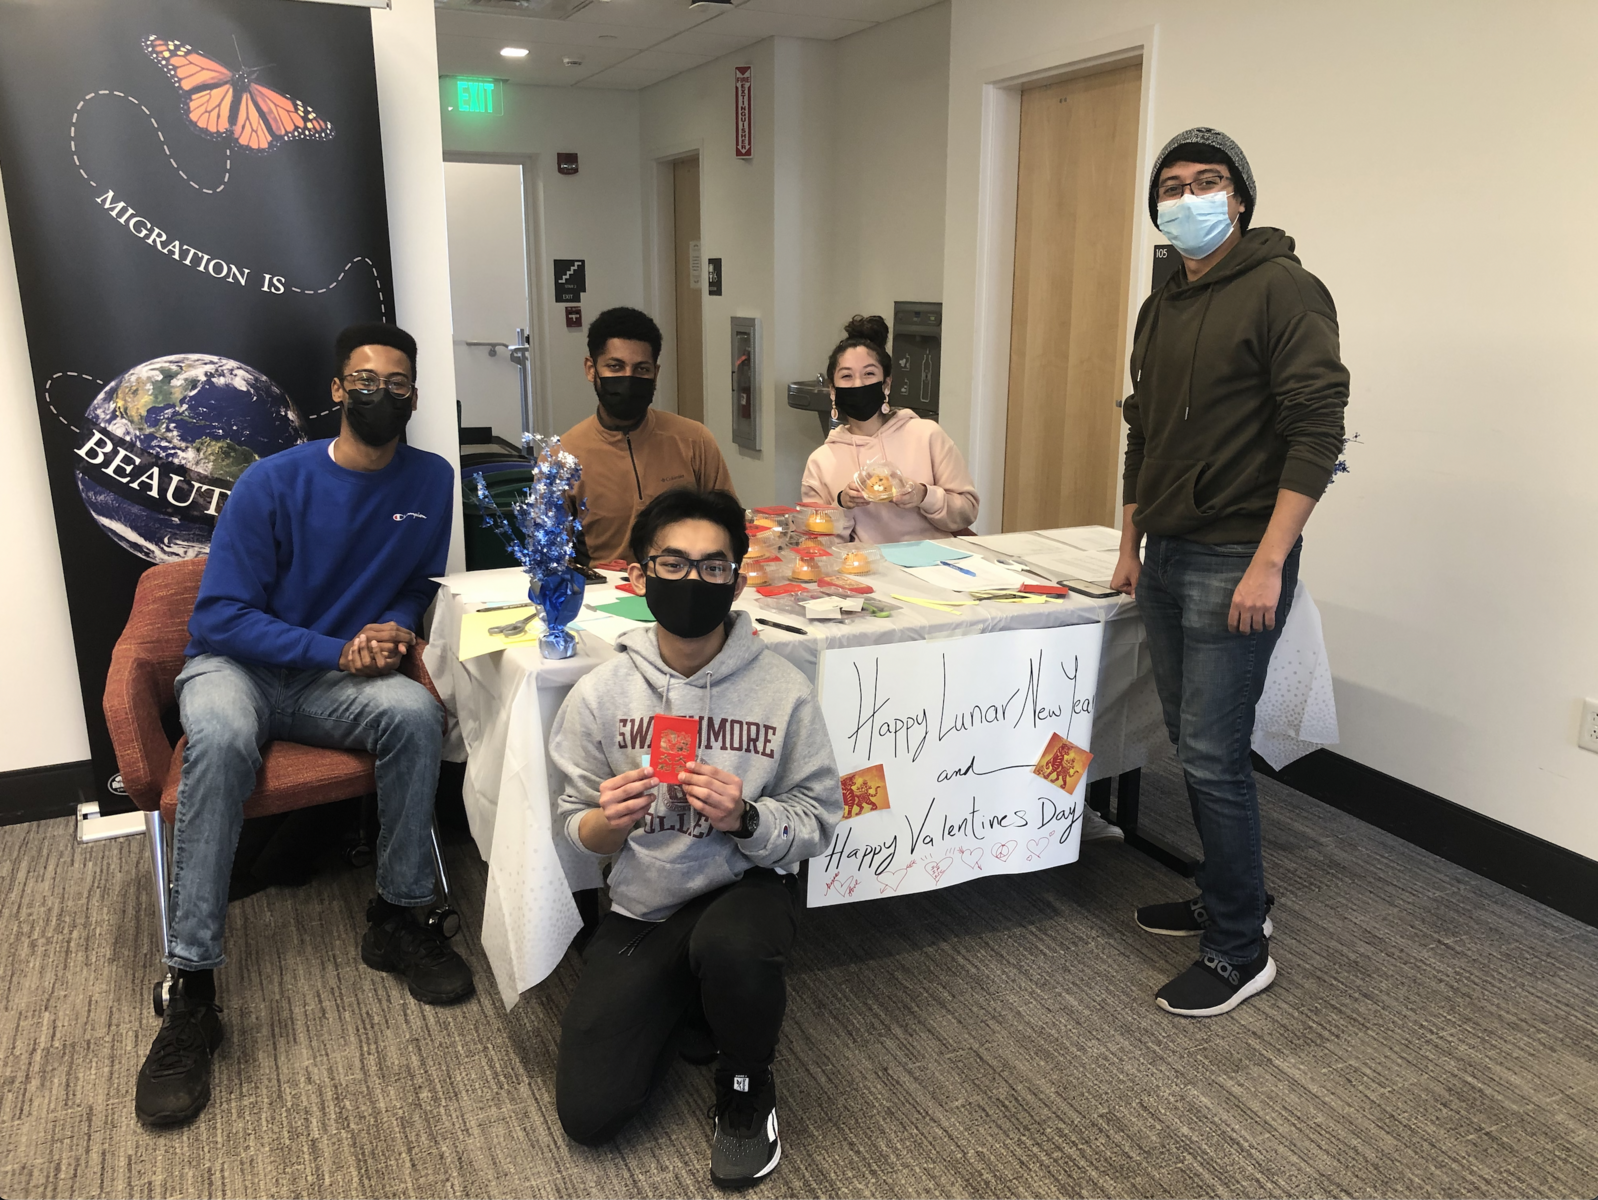 Masked IC Interns stand around a table, indoors, with a sign that says "Lunar New Year." They are crafting good luck messages to hand out, along with pastries, for the new year.